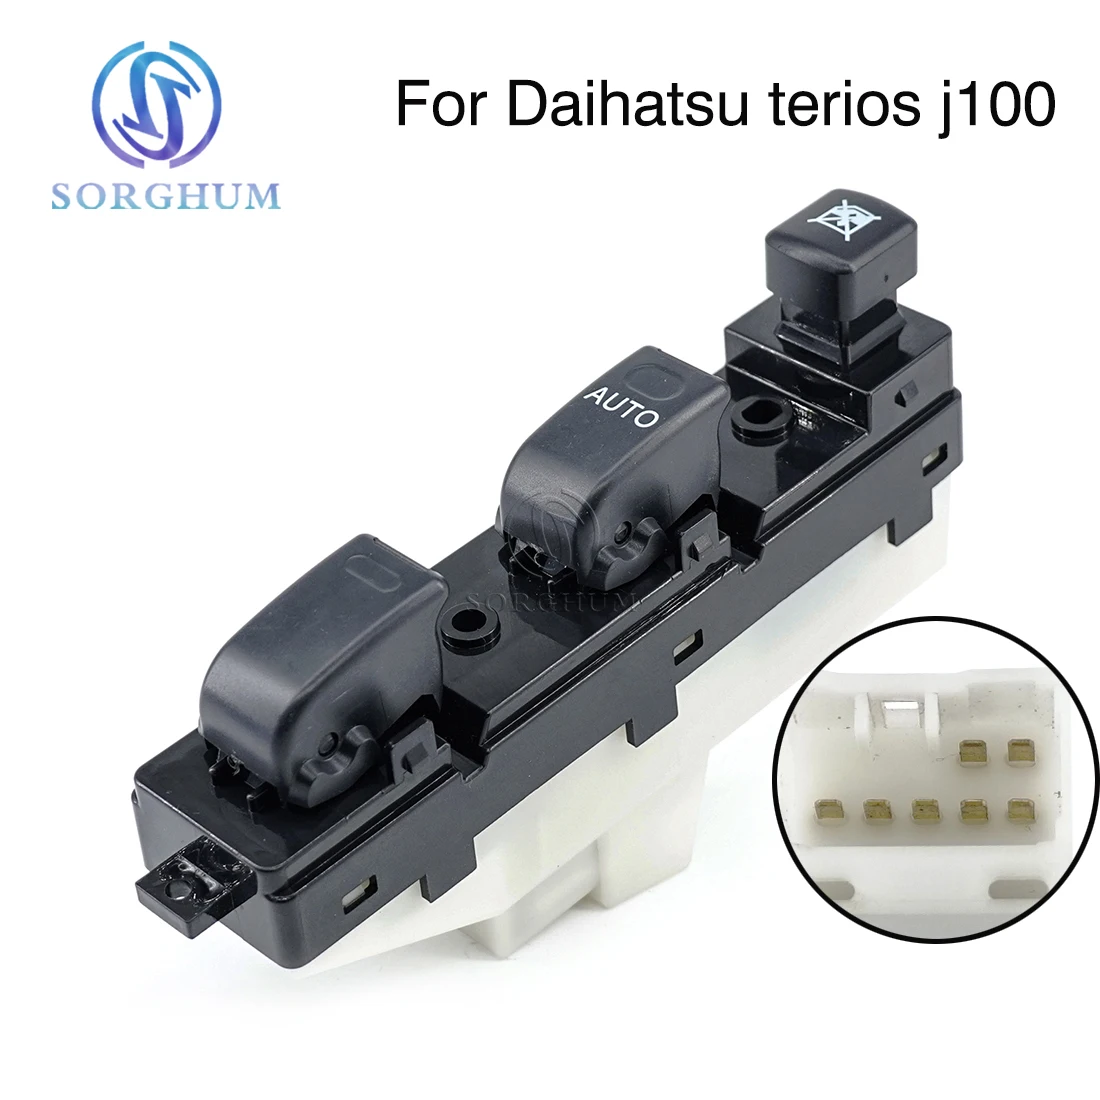 

Sorghum 7PINS Electric Power Window Master Control Switch GLass Lifter Button For Daihatsu Terios j100 1997 Wagon Car Accessries